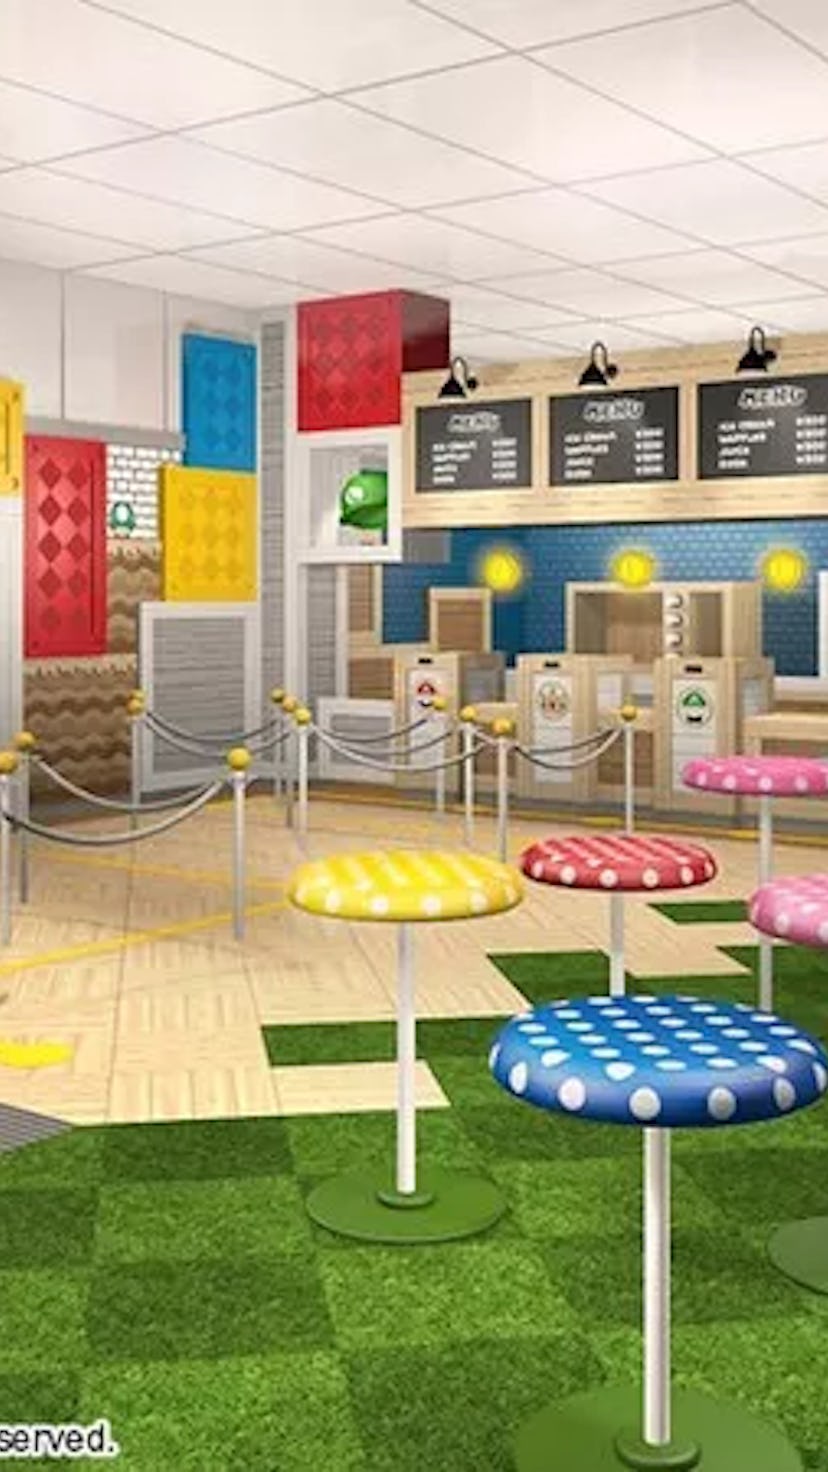 A render of a cafe in Super Nintendo World which is set to open in Spring 2021.